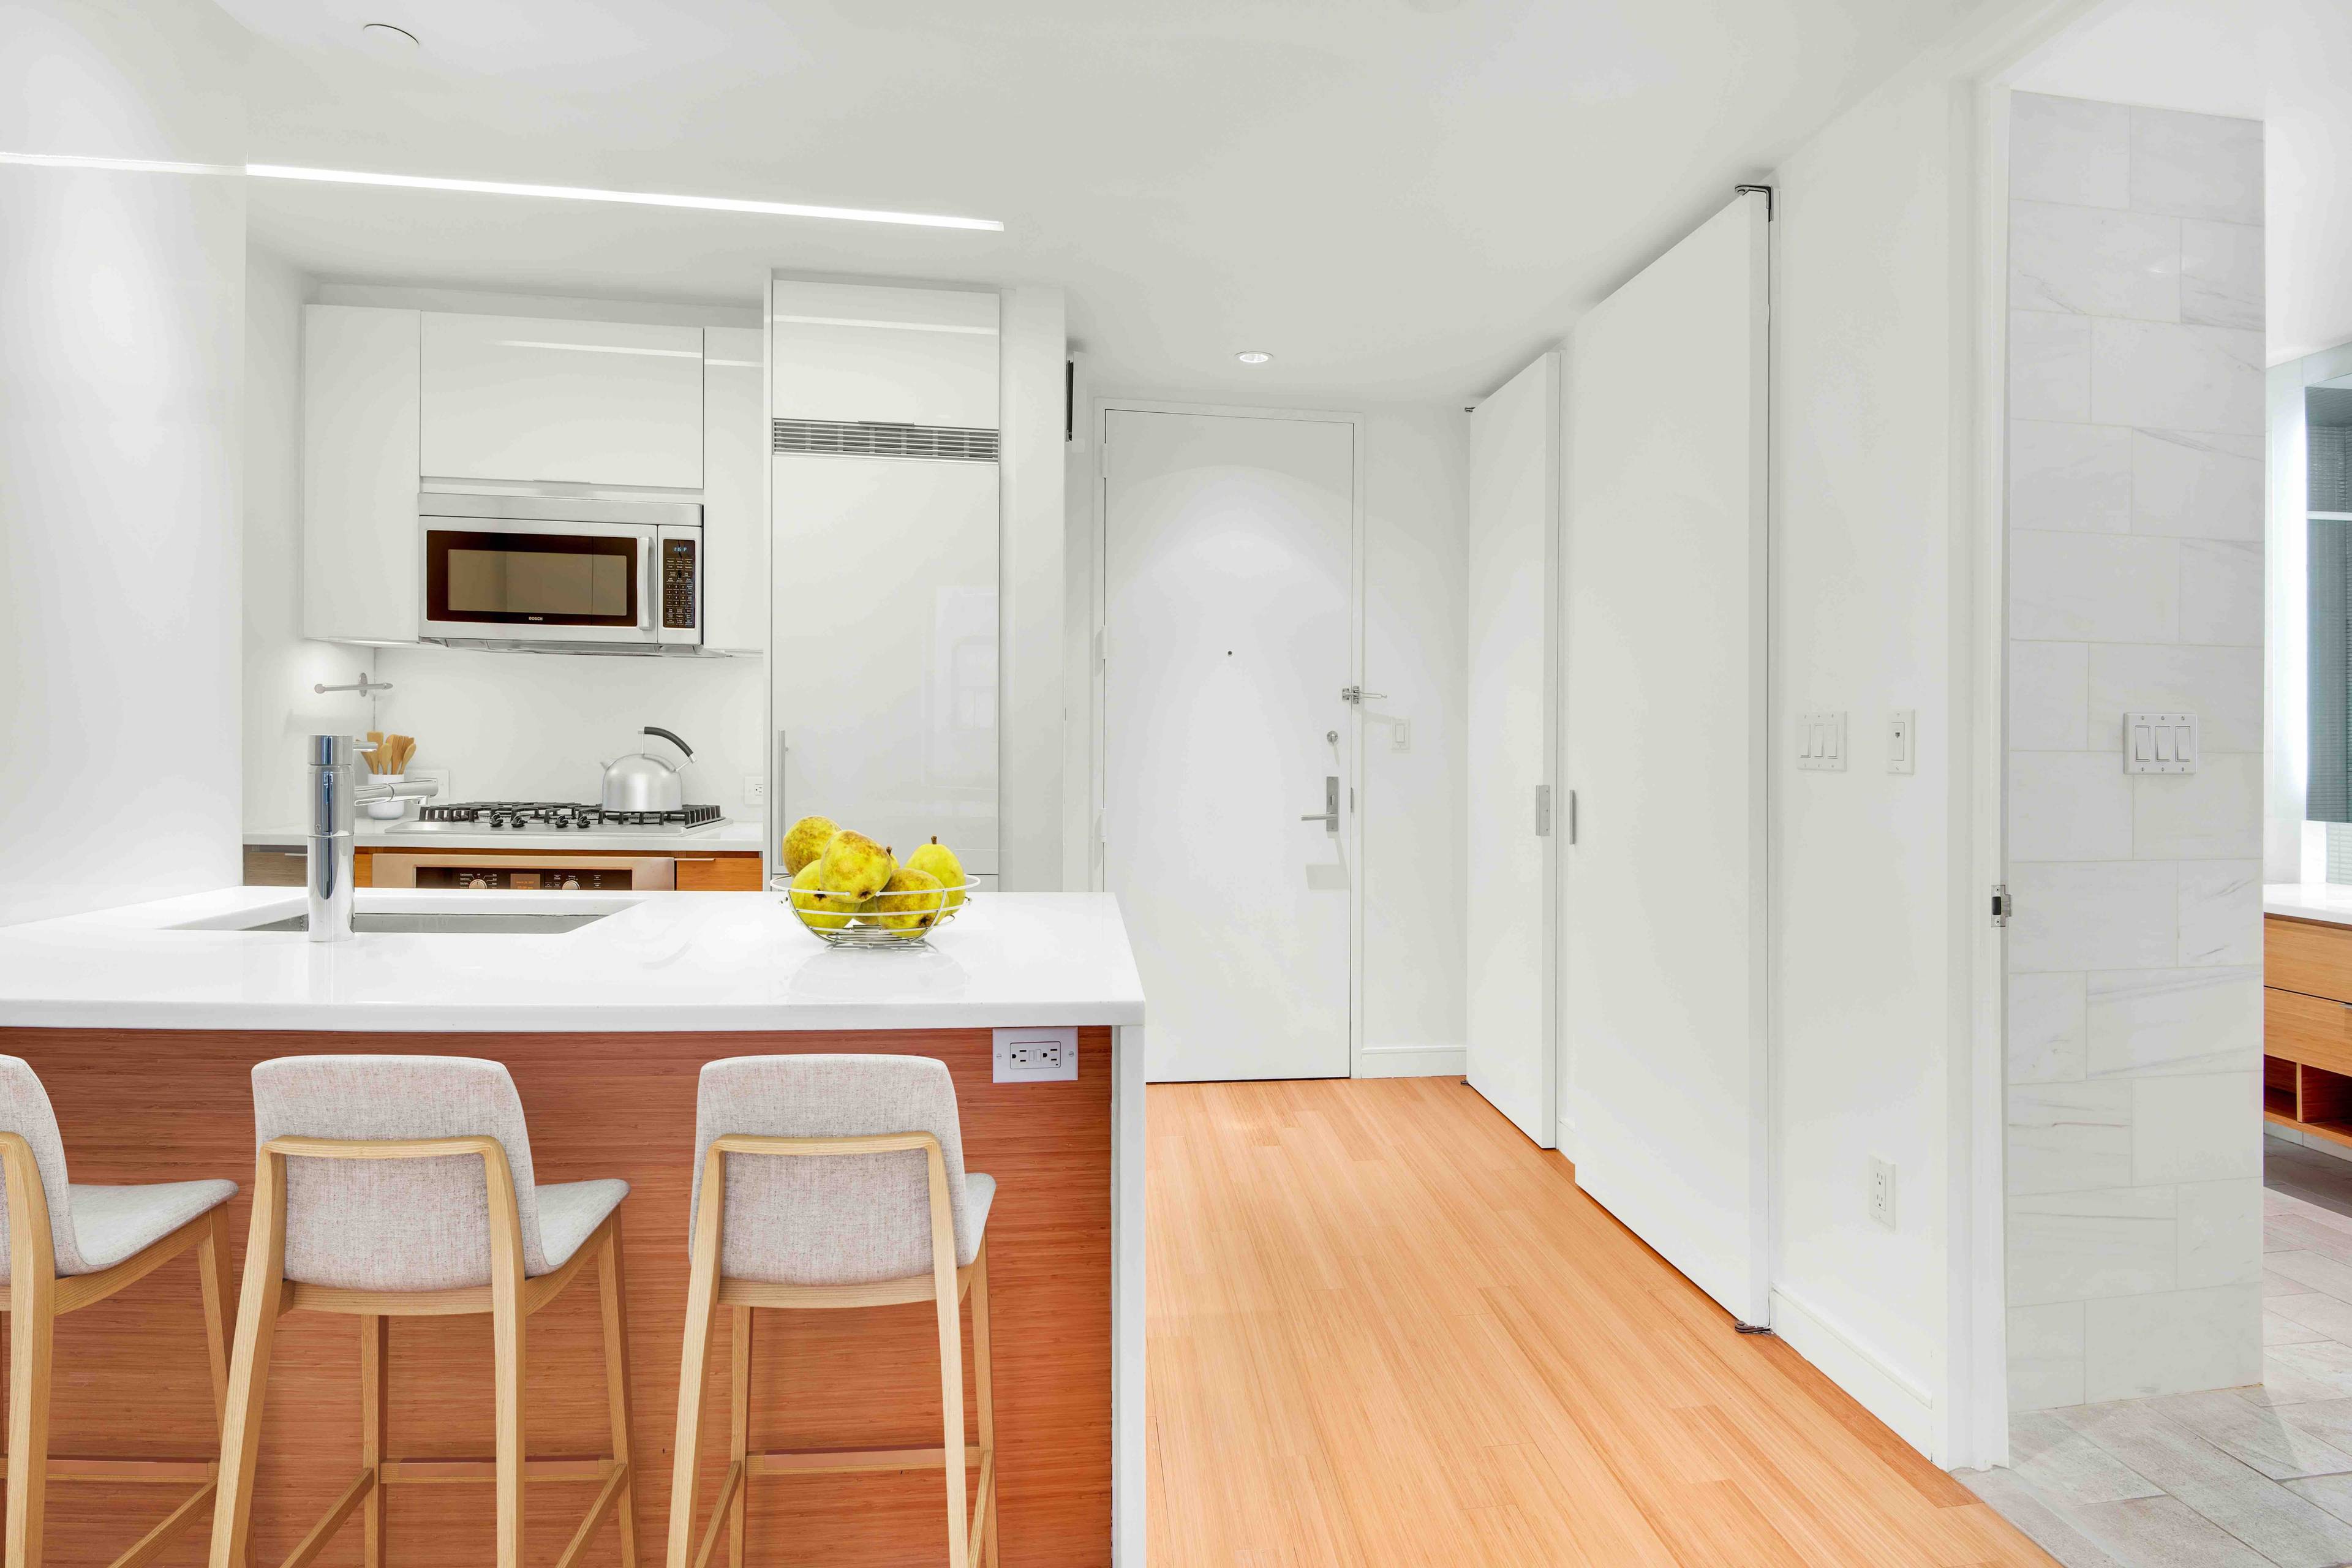 No. 3E is a one bedroom apartment reminiscent of the zen like ambiance 303 living has to offer.